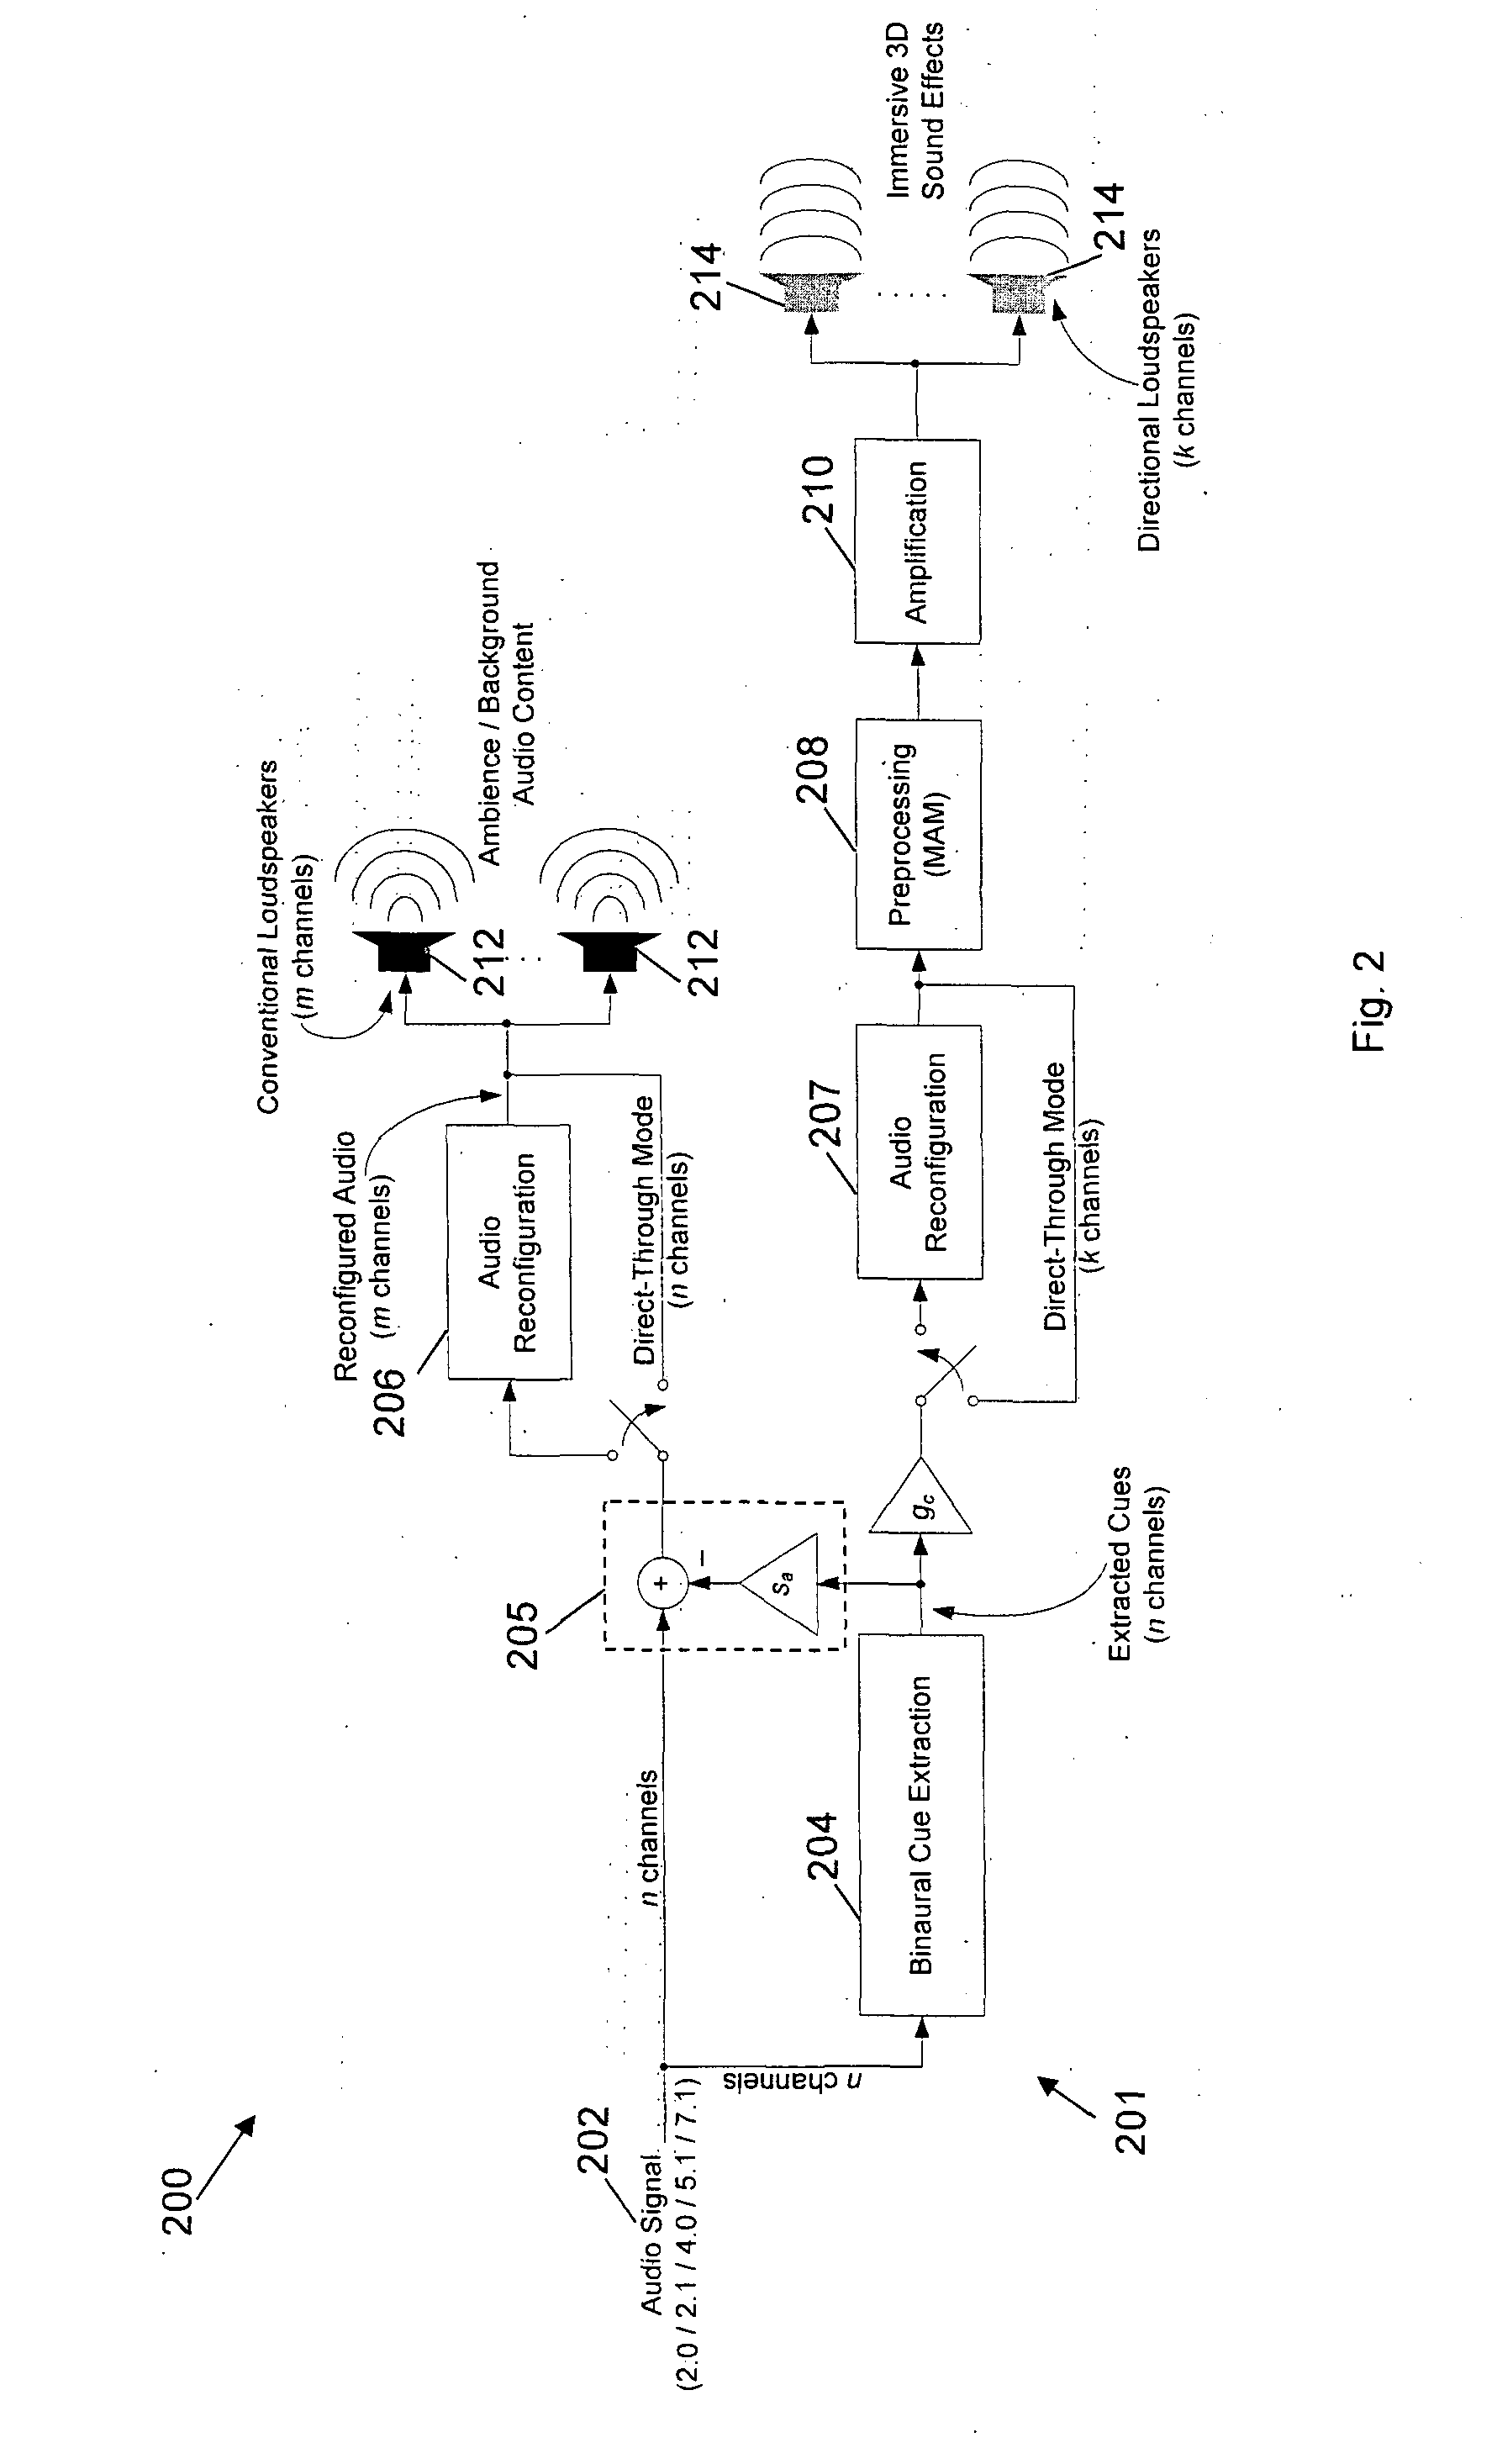 System and method for processing an input signal to produce 3D audio effects